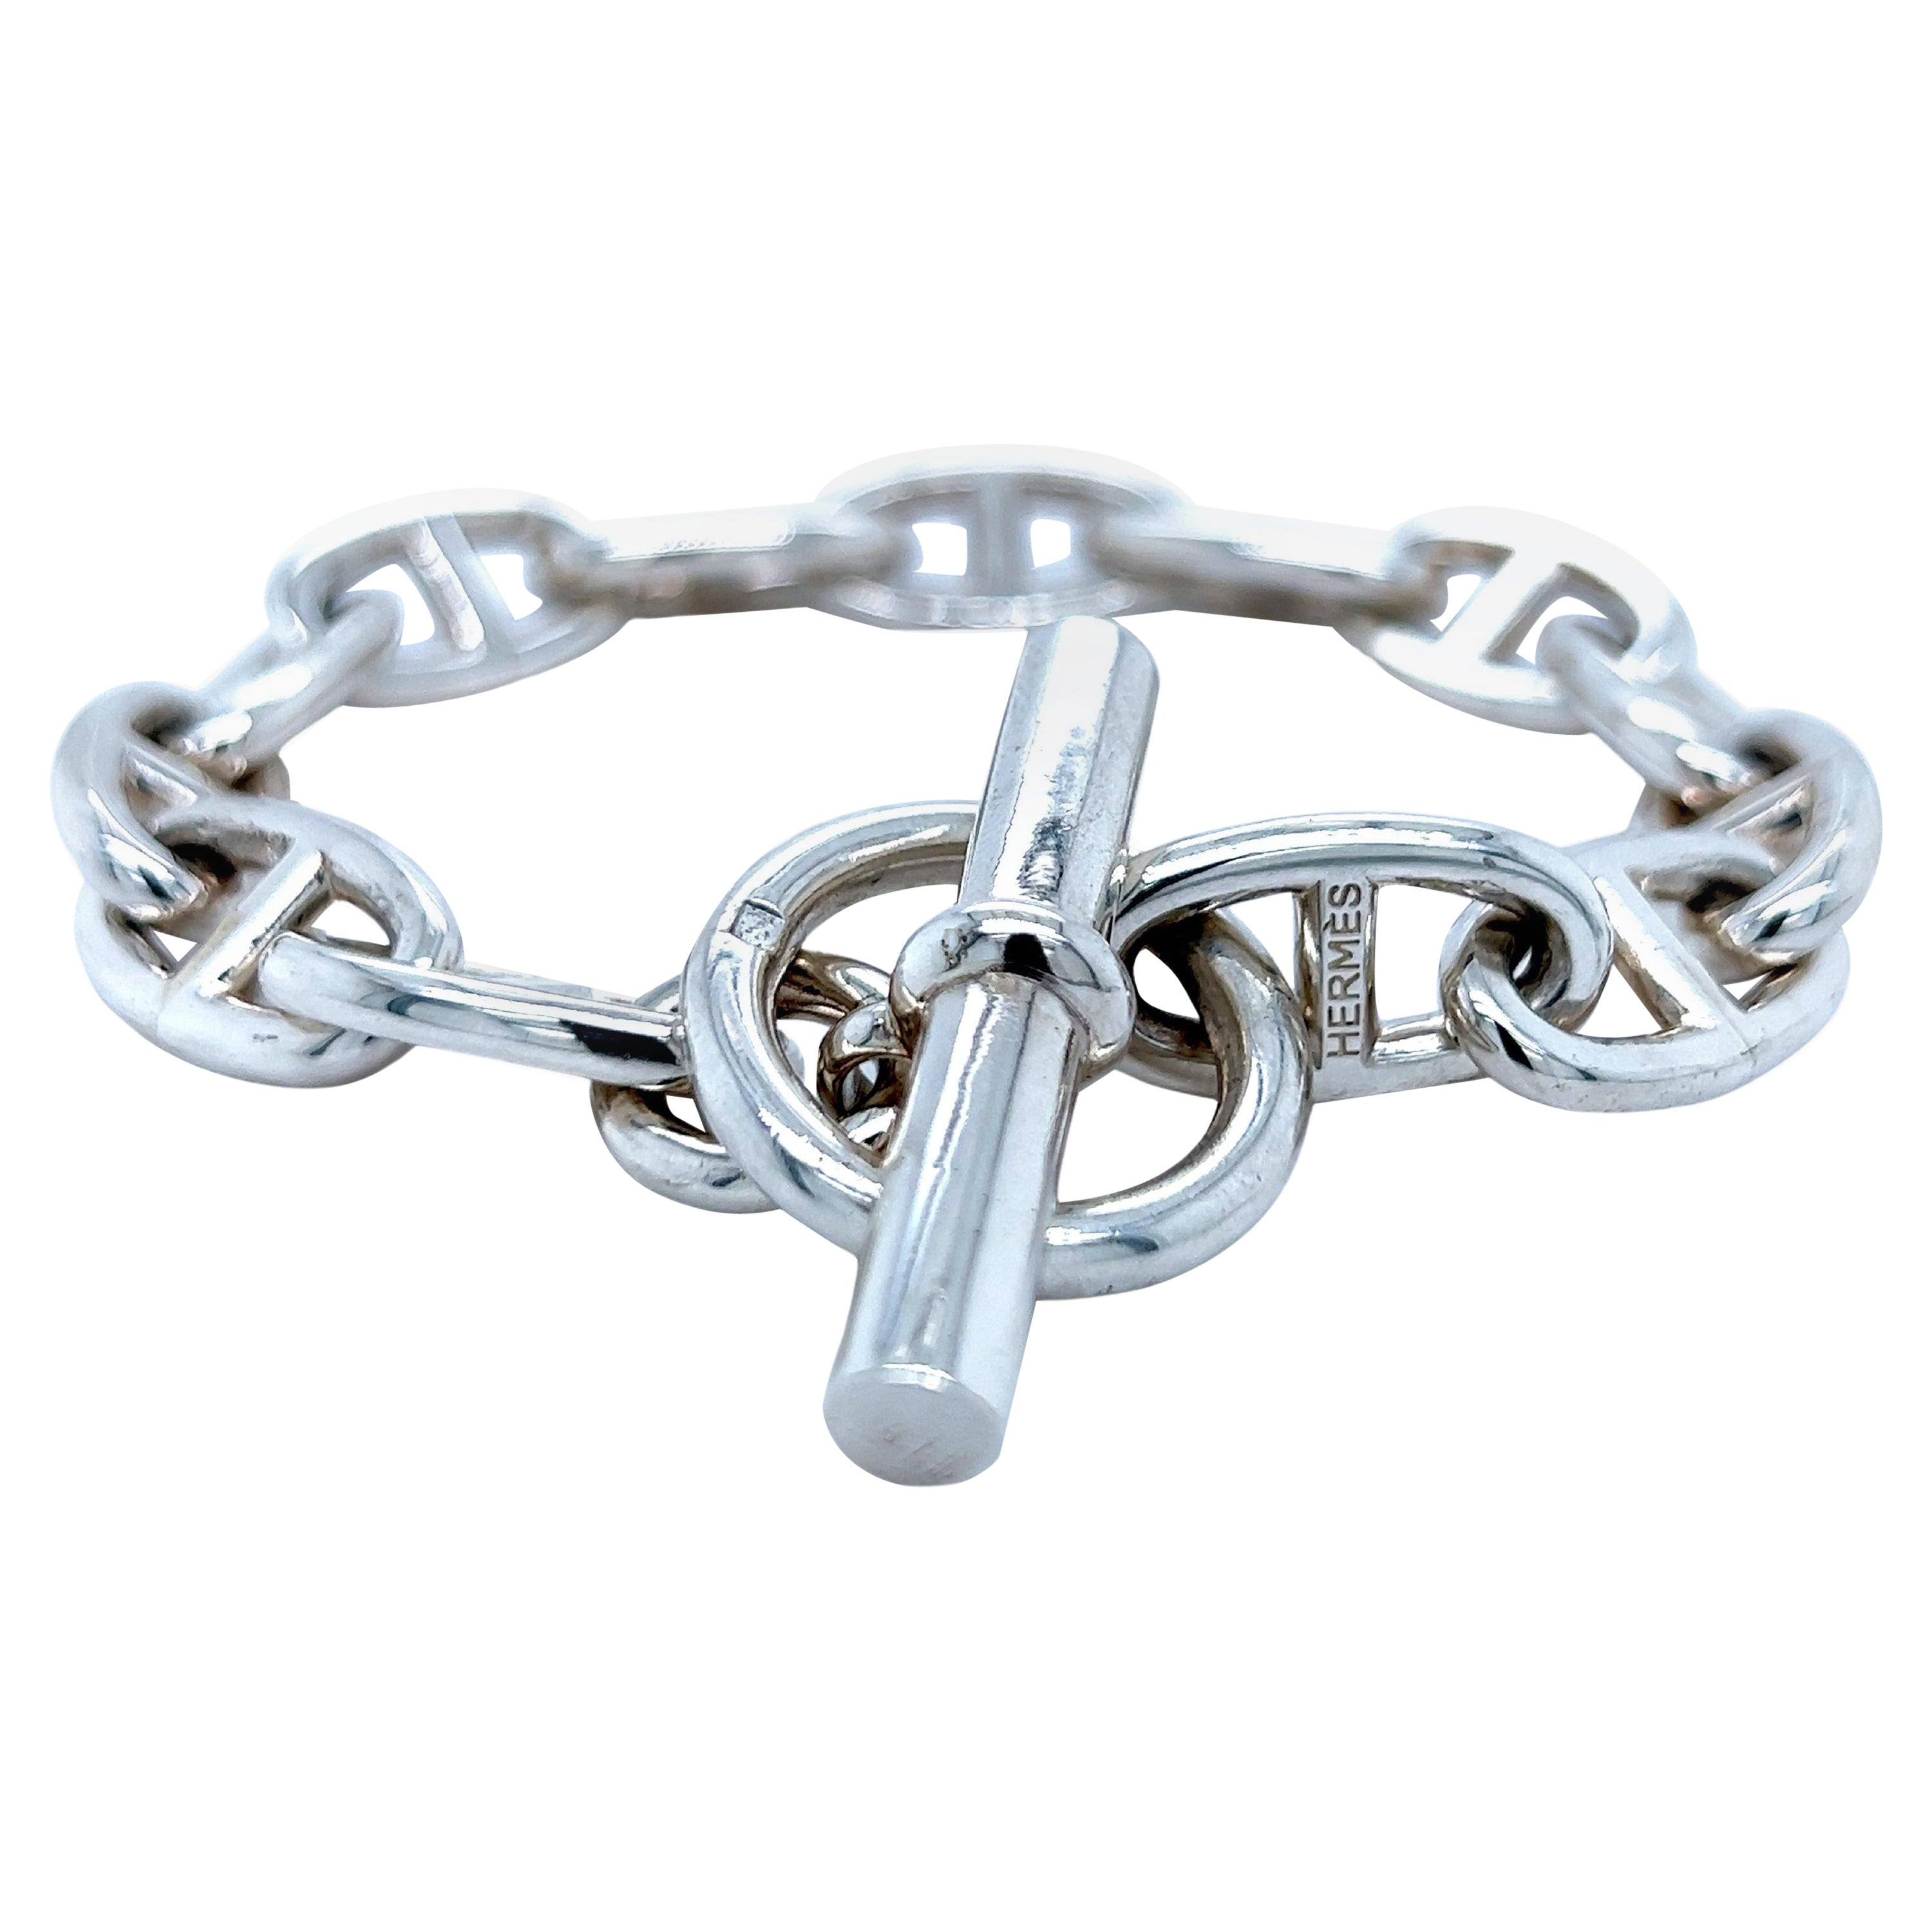 Chic yet Timeless, absolutely Iconic Hermès Sterling Silver Chaine d'Ancre Bracelet, circa 1995.
The story of this piece began more than 80 years ago, in 1938, when Robert Dumas, a member of the Hermès family, decided to take inspiration from a ship